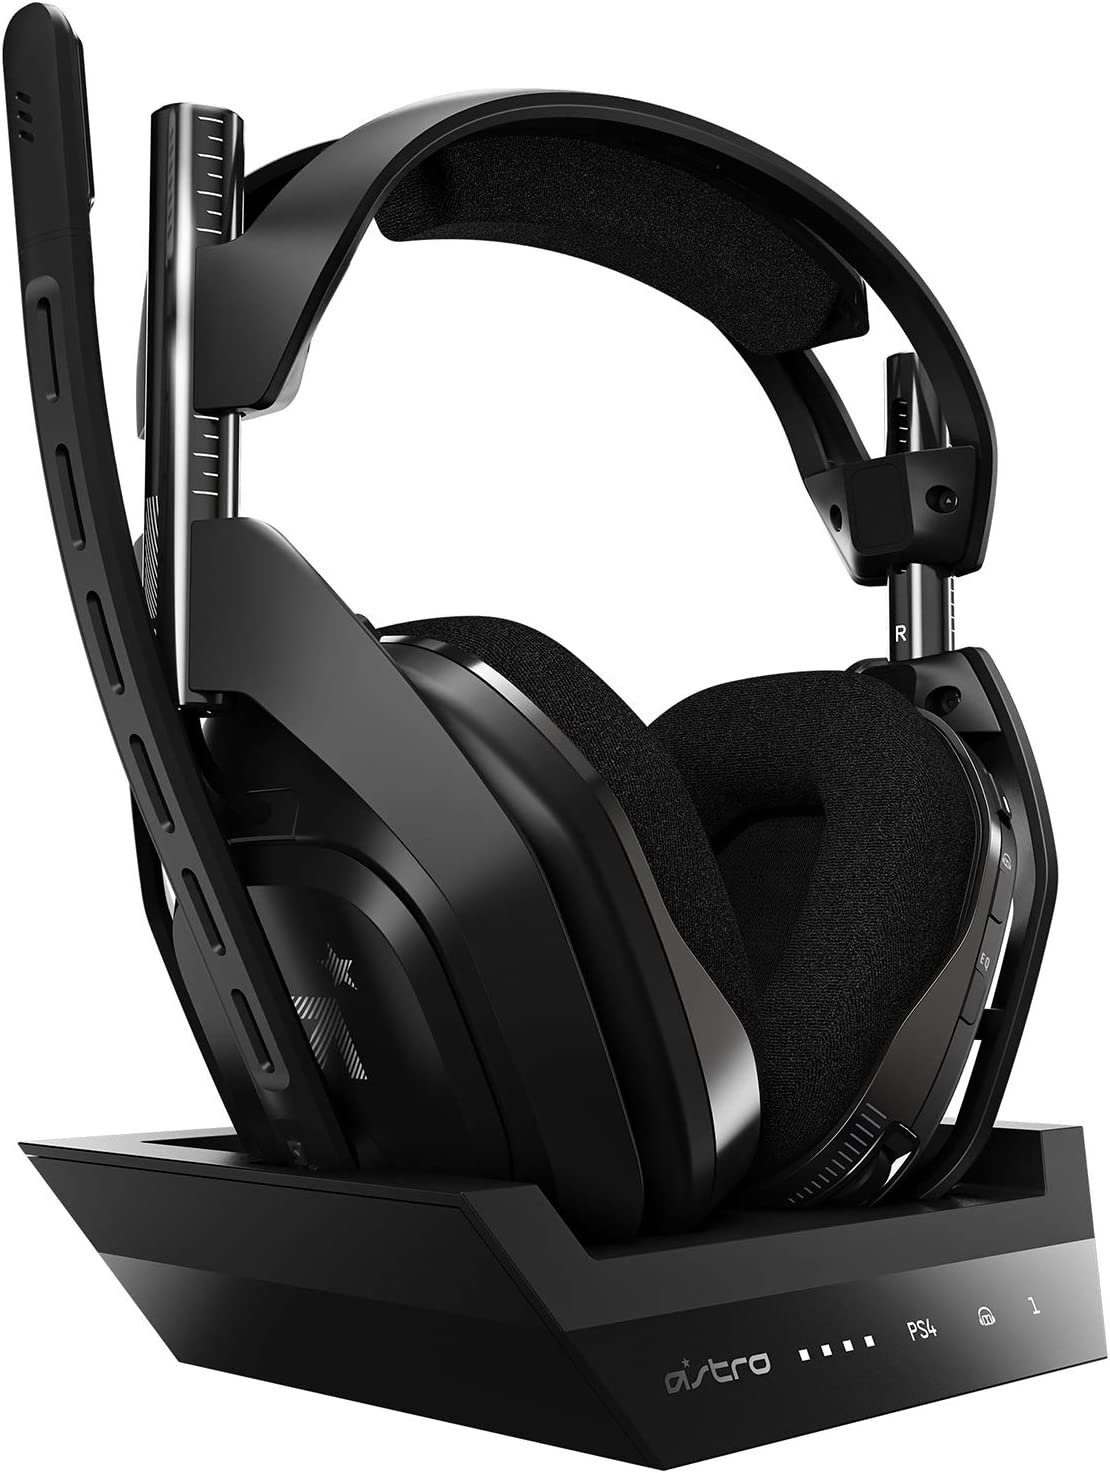 Gamer OTTO | kaufen Headsets » online Gamingheadsets